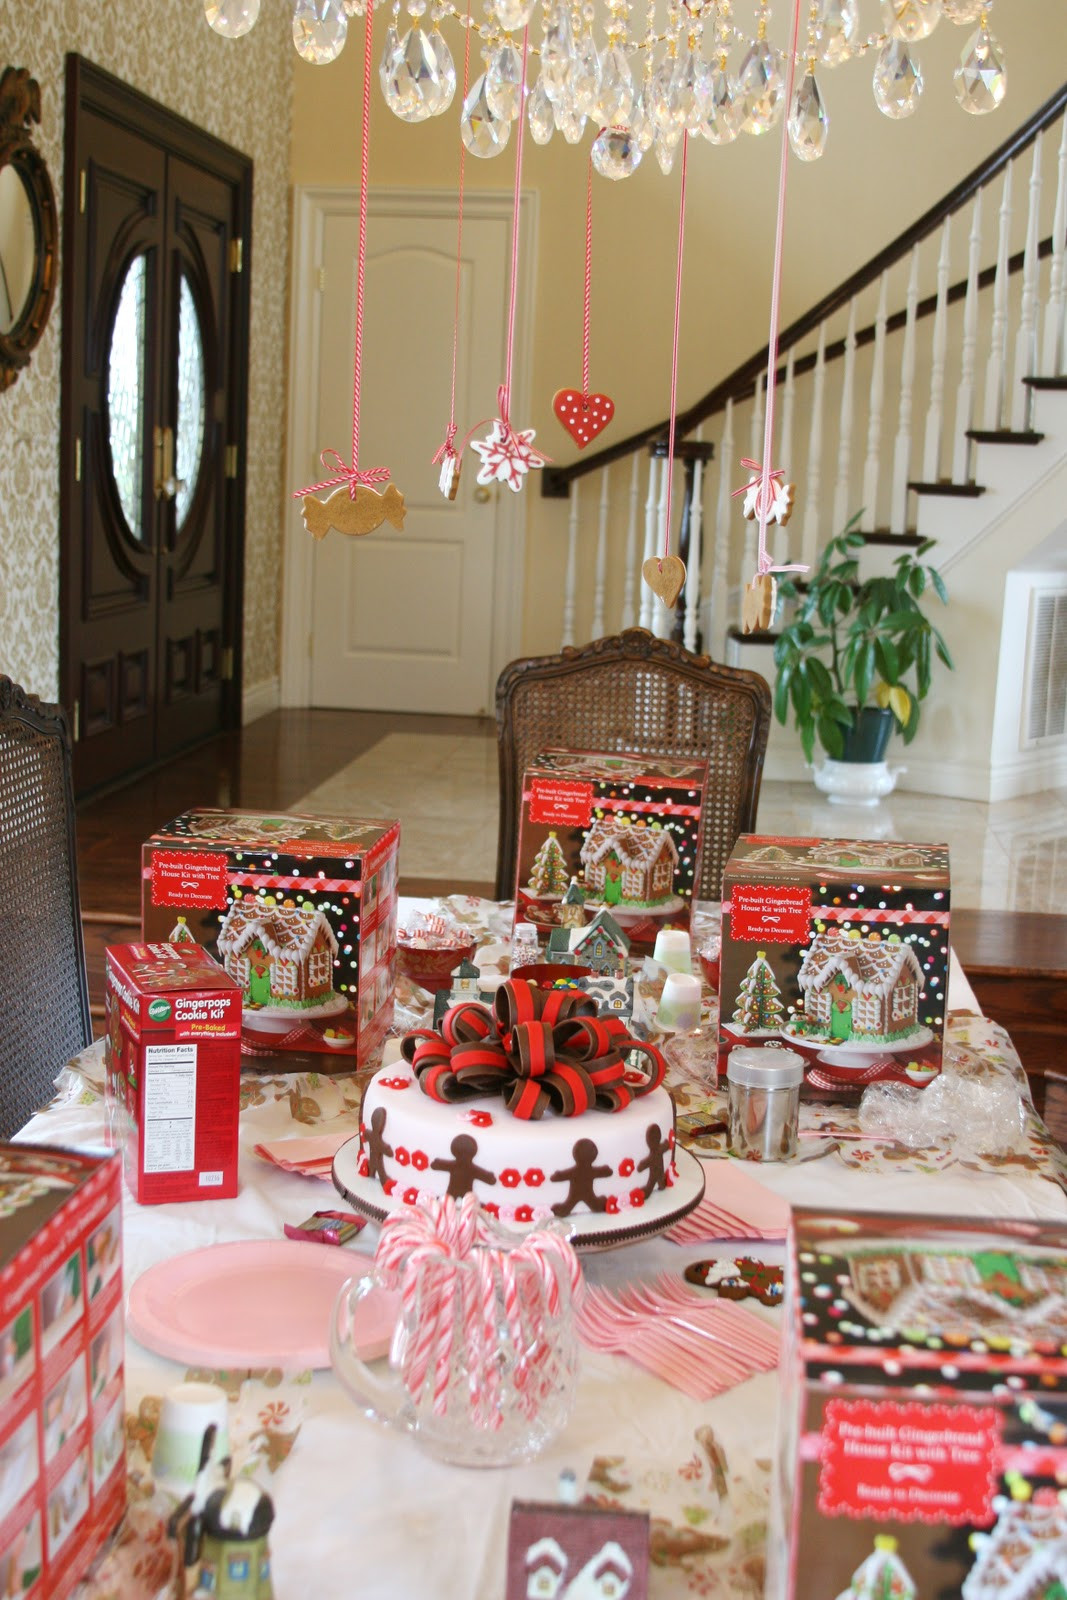 Christmas Birthday Party Unique Sweet Parties A Gingerbread Party ? Glorious Treats from Alltopcollections